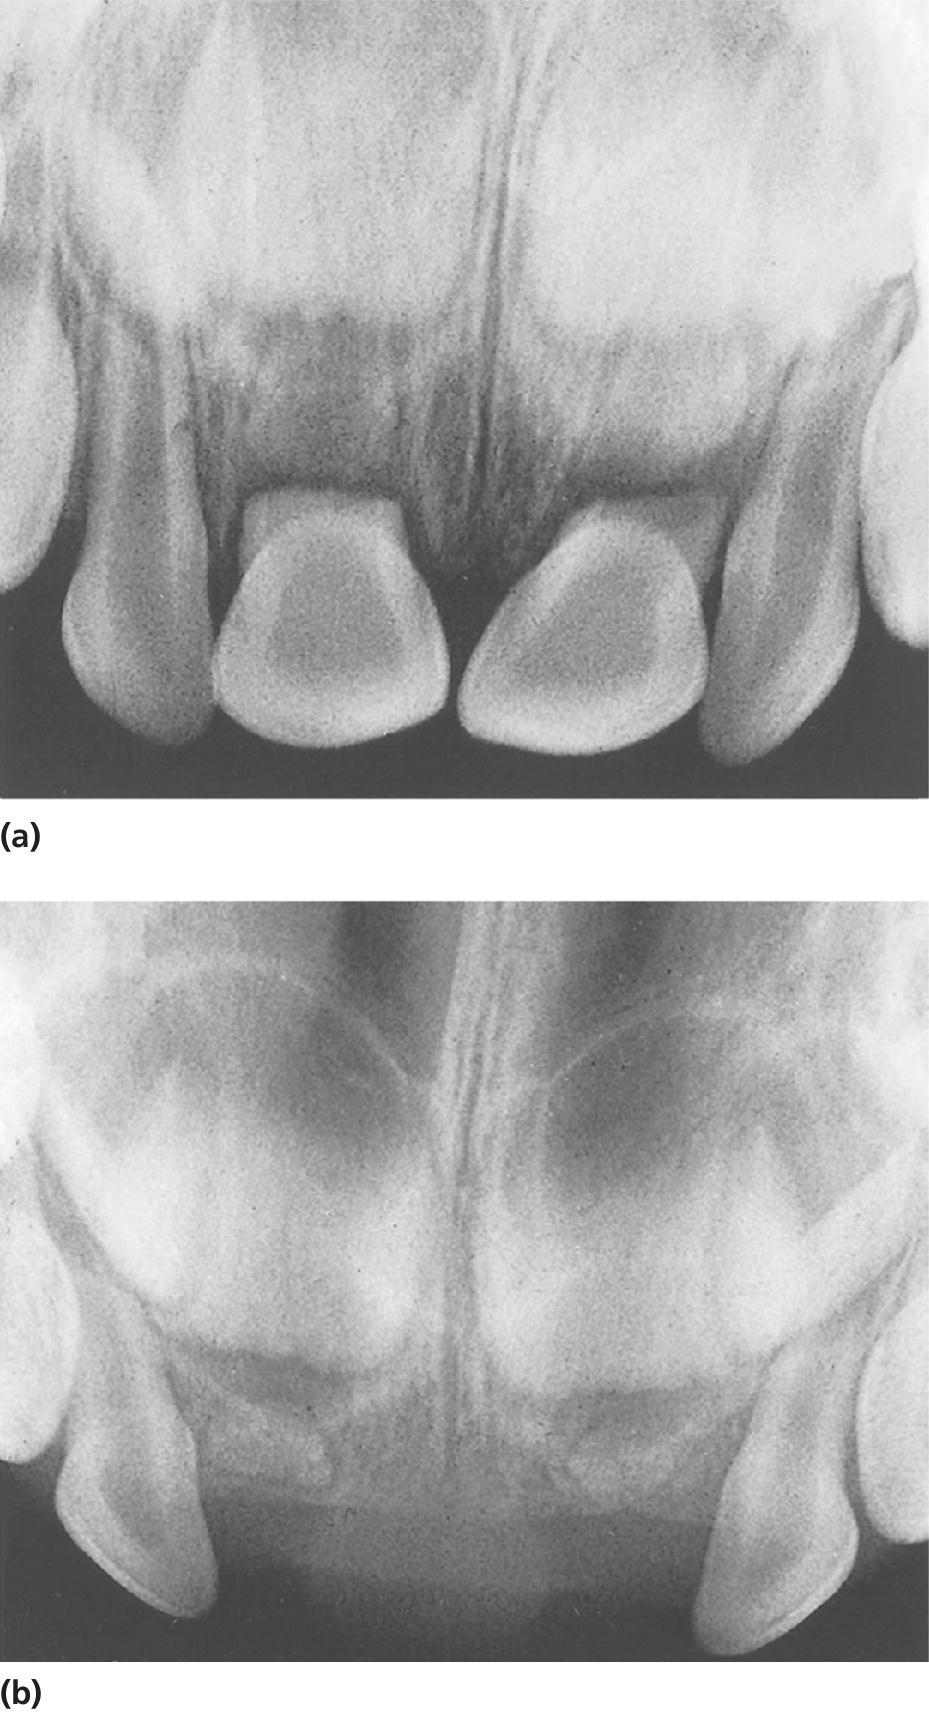 Radiographs displaying fractured roots of both central incisors with dislocation of the coronal fragments (left) and normal resorption of the apical fragments after removal of the coronal fragments (right).